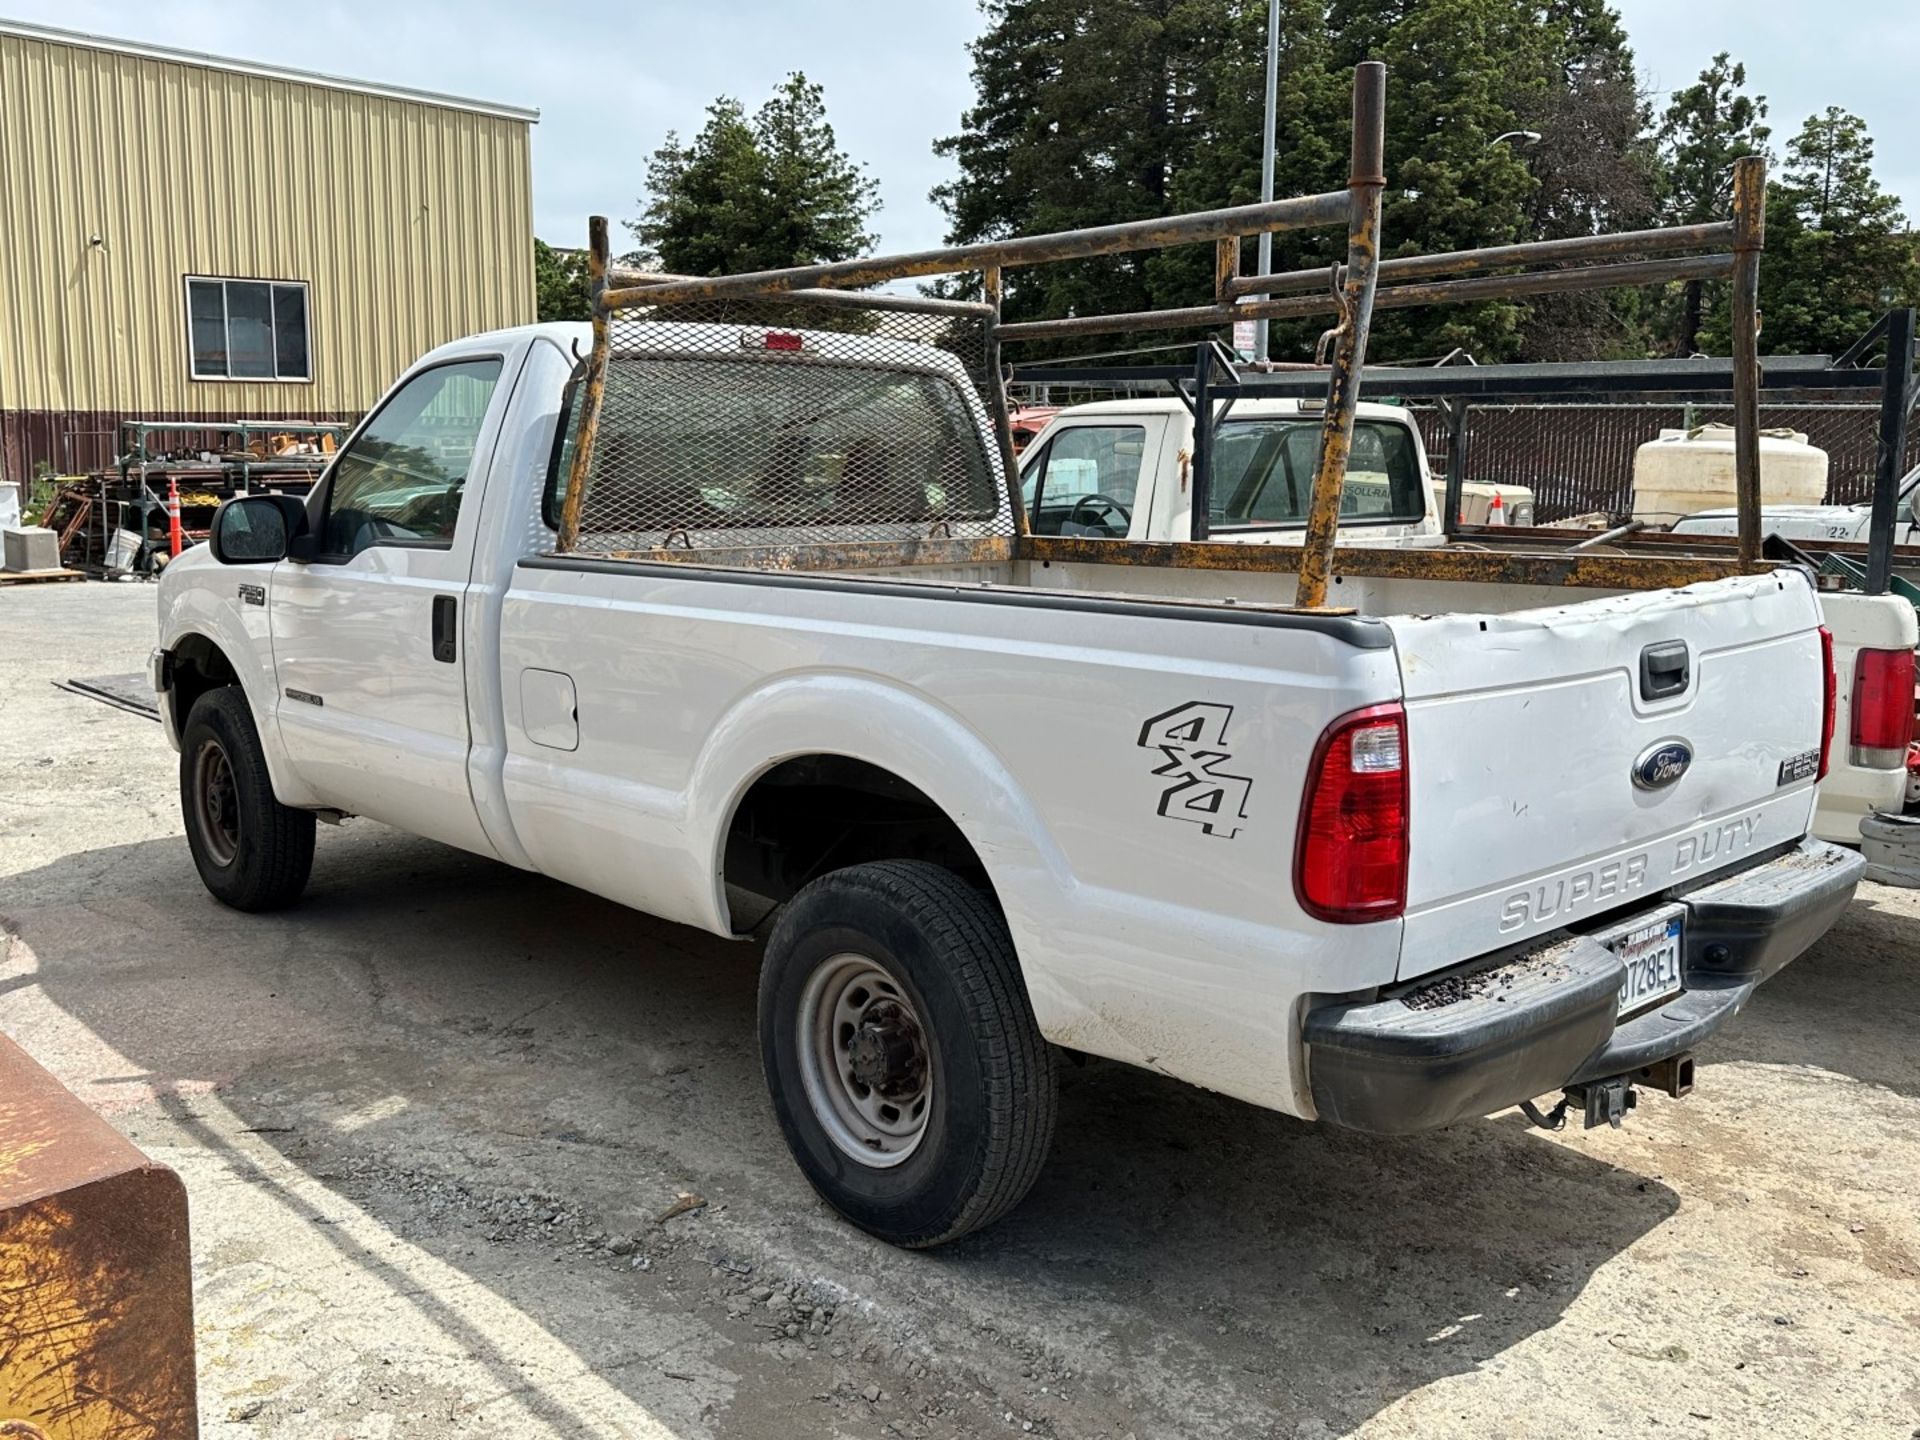 4x4 Pickup Truck - Image 2 of 6